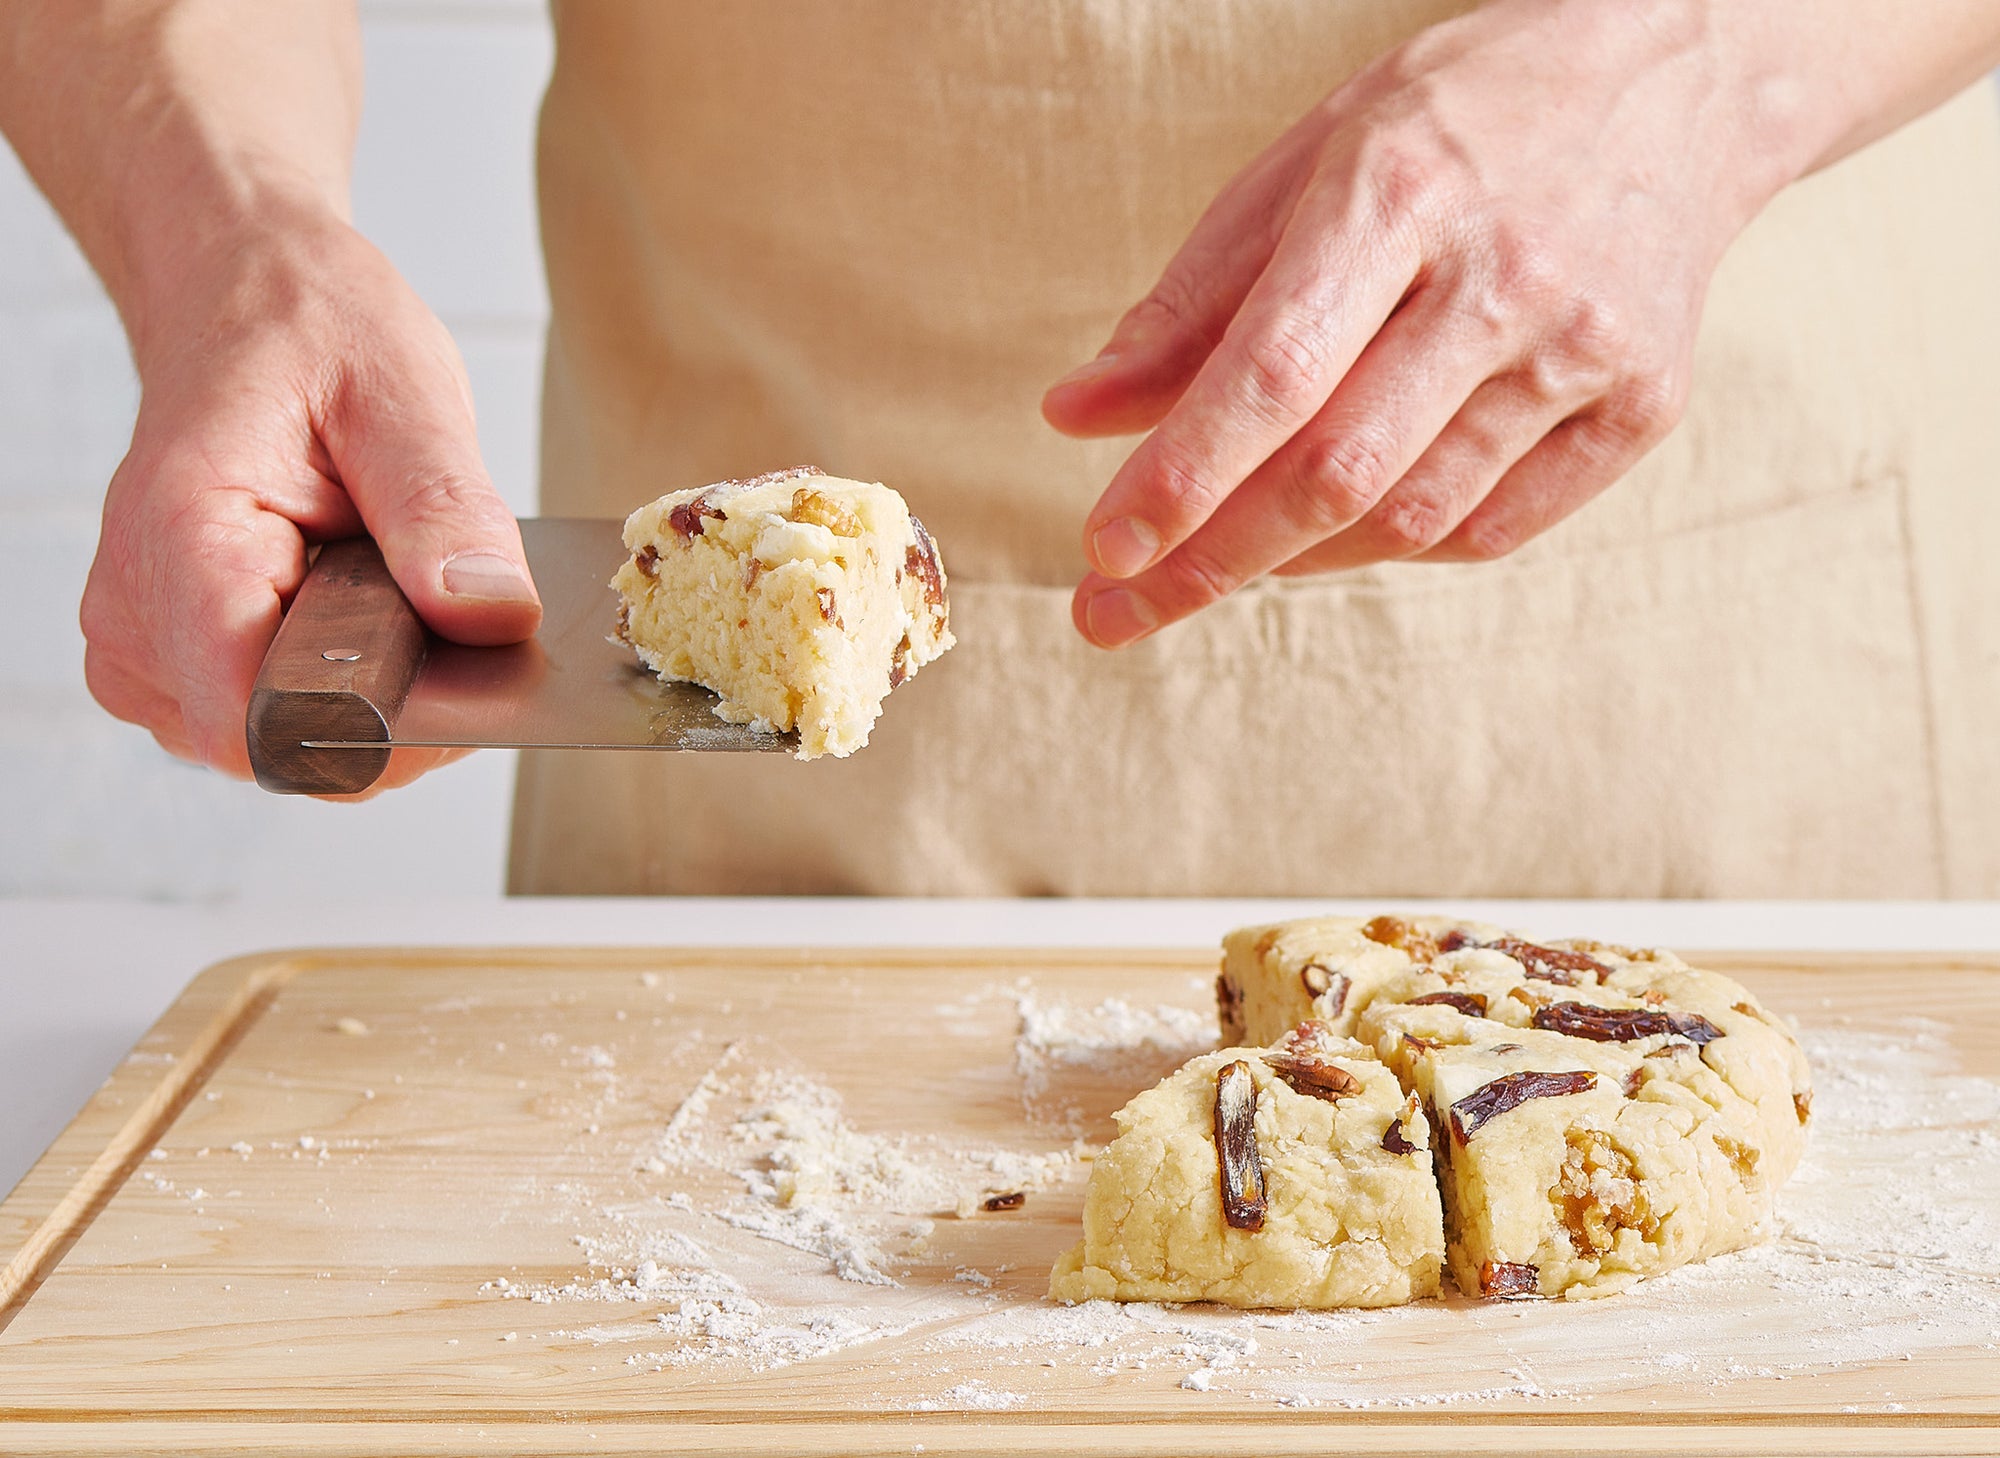 {{walnut,blue}} A pair of hands holds a Misen Bench Scraper with walnut handle and a piece of dough, as they divide scone dough into sections, working atop a Misen Wood Cutting Board.